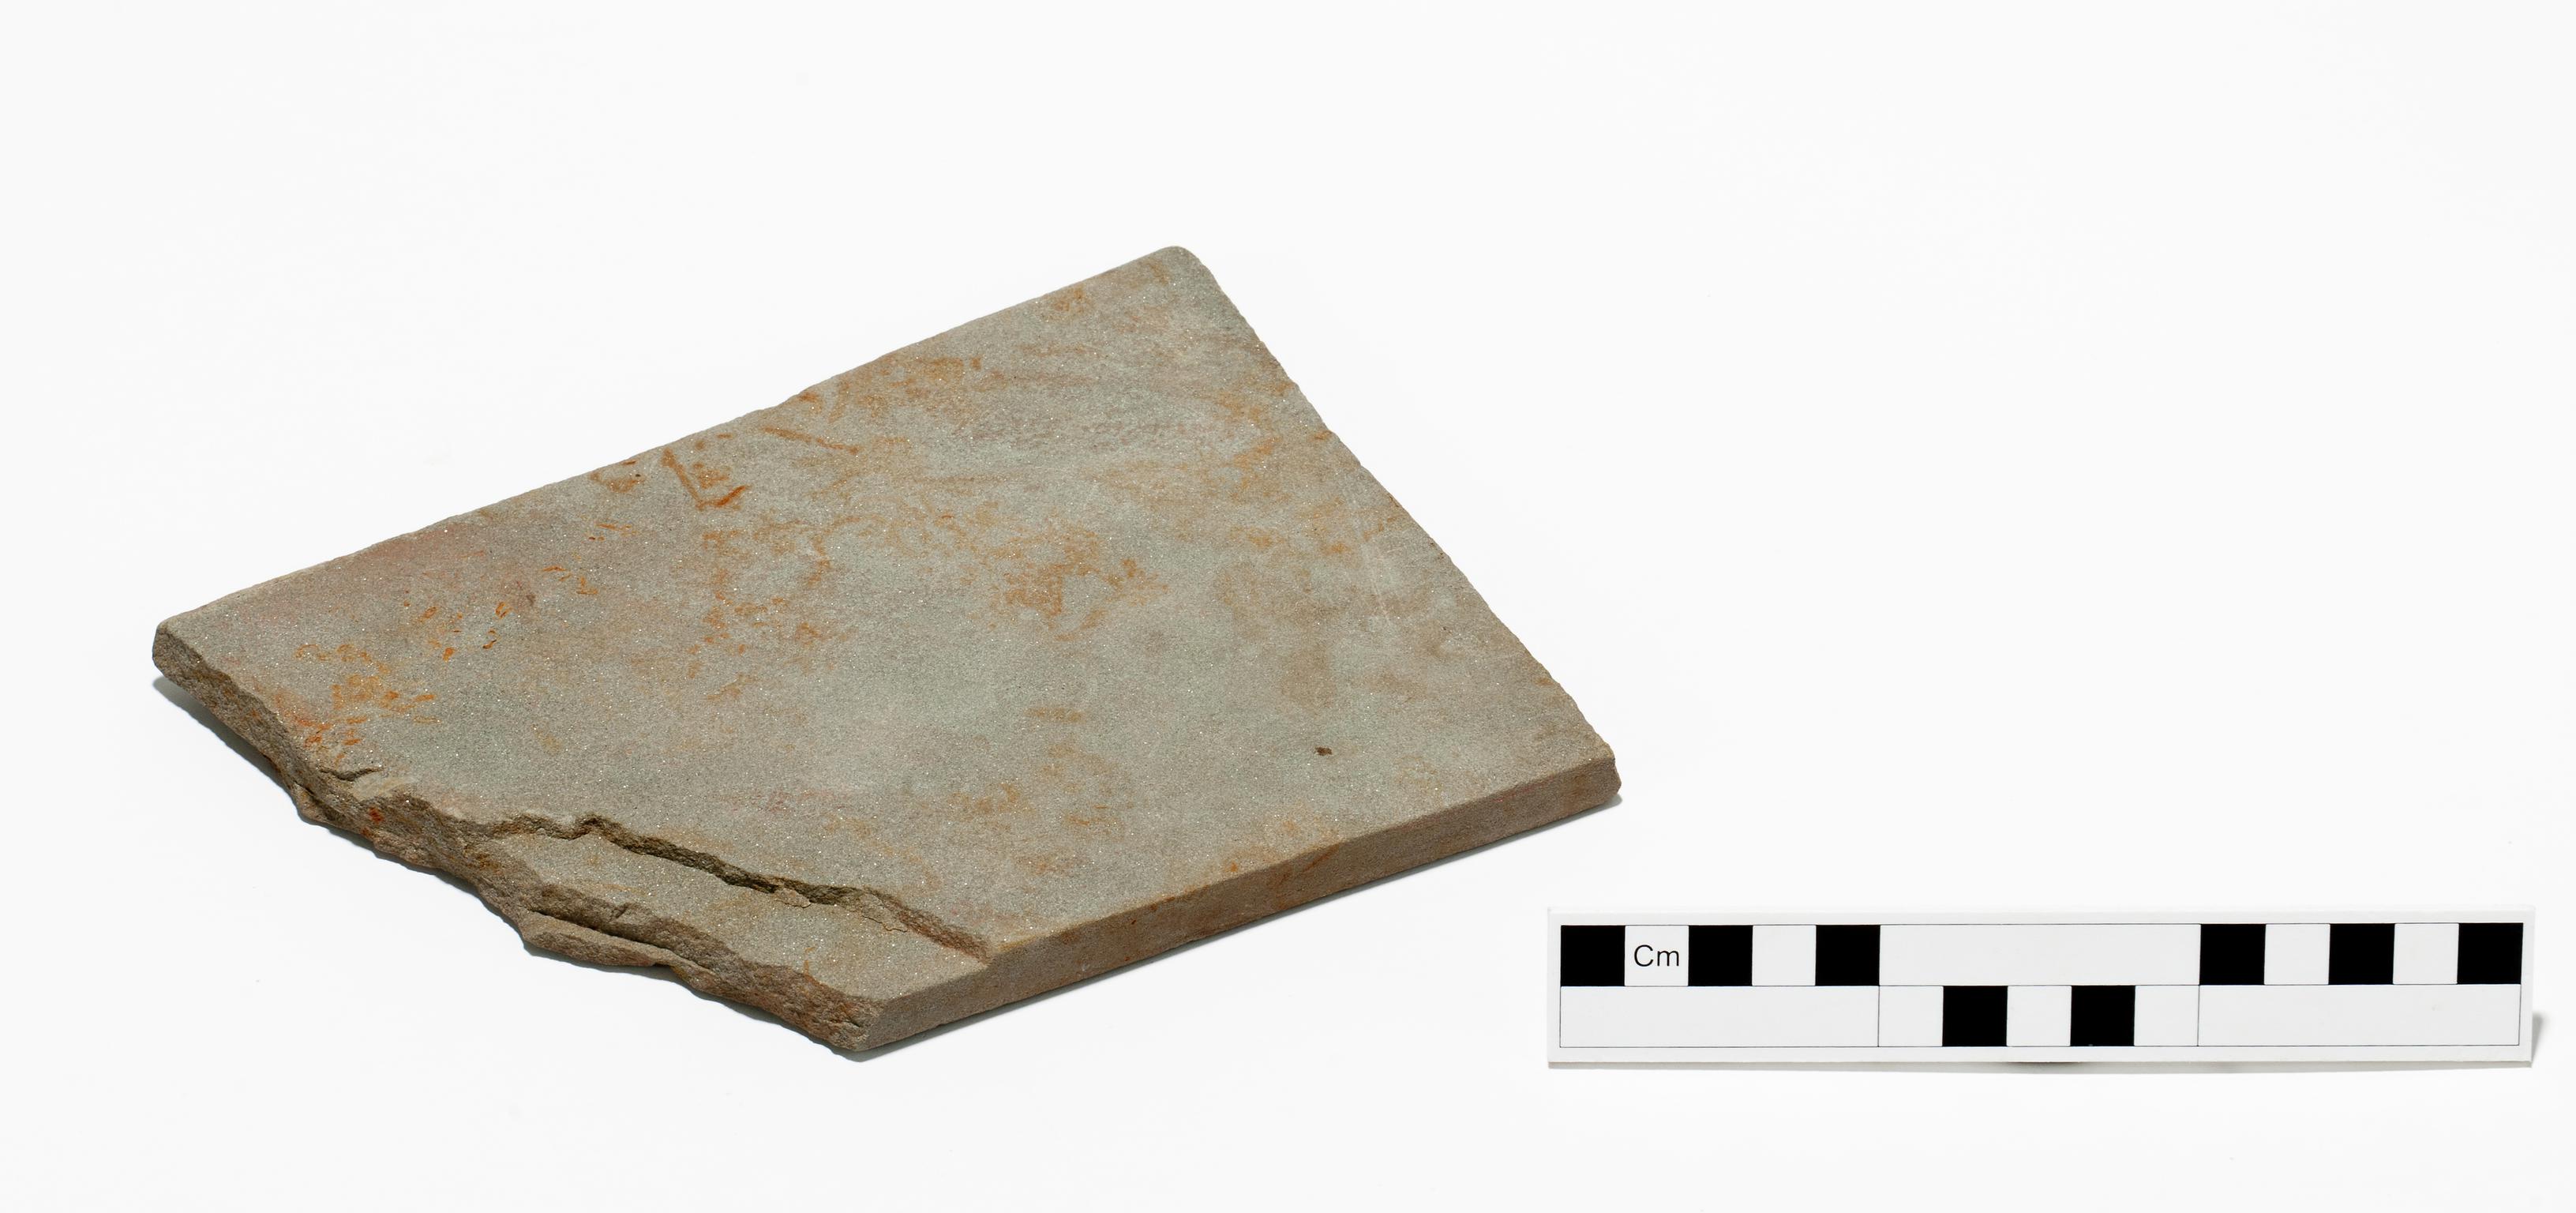 Early Medieval whetstone